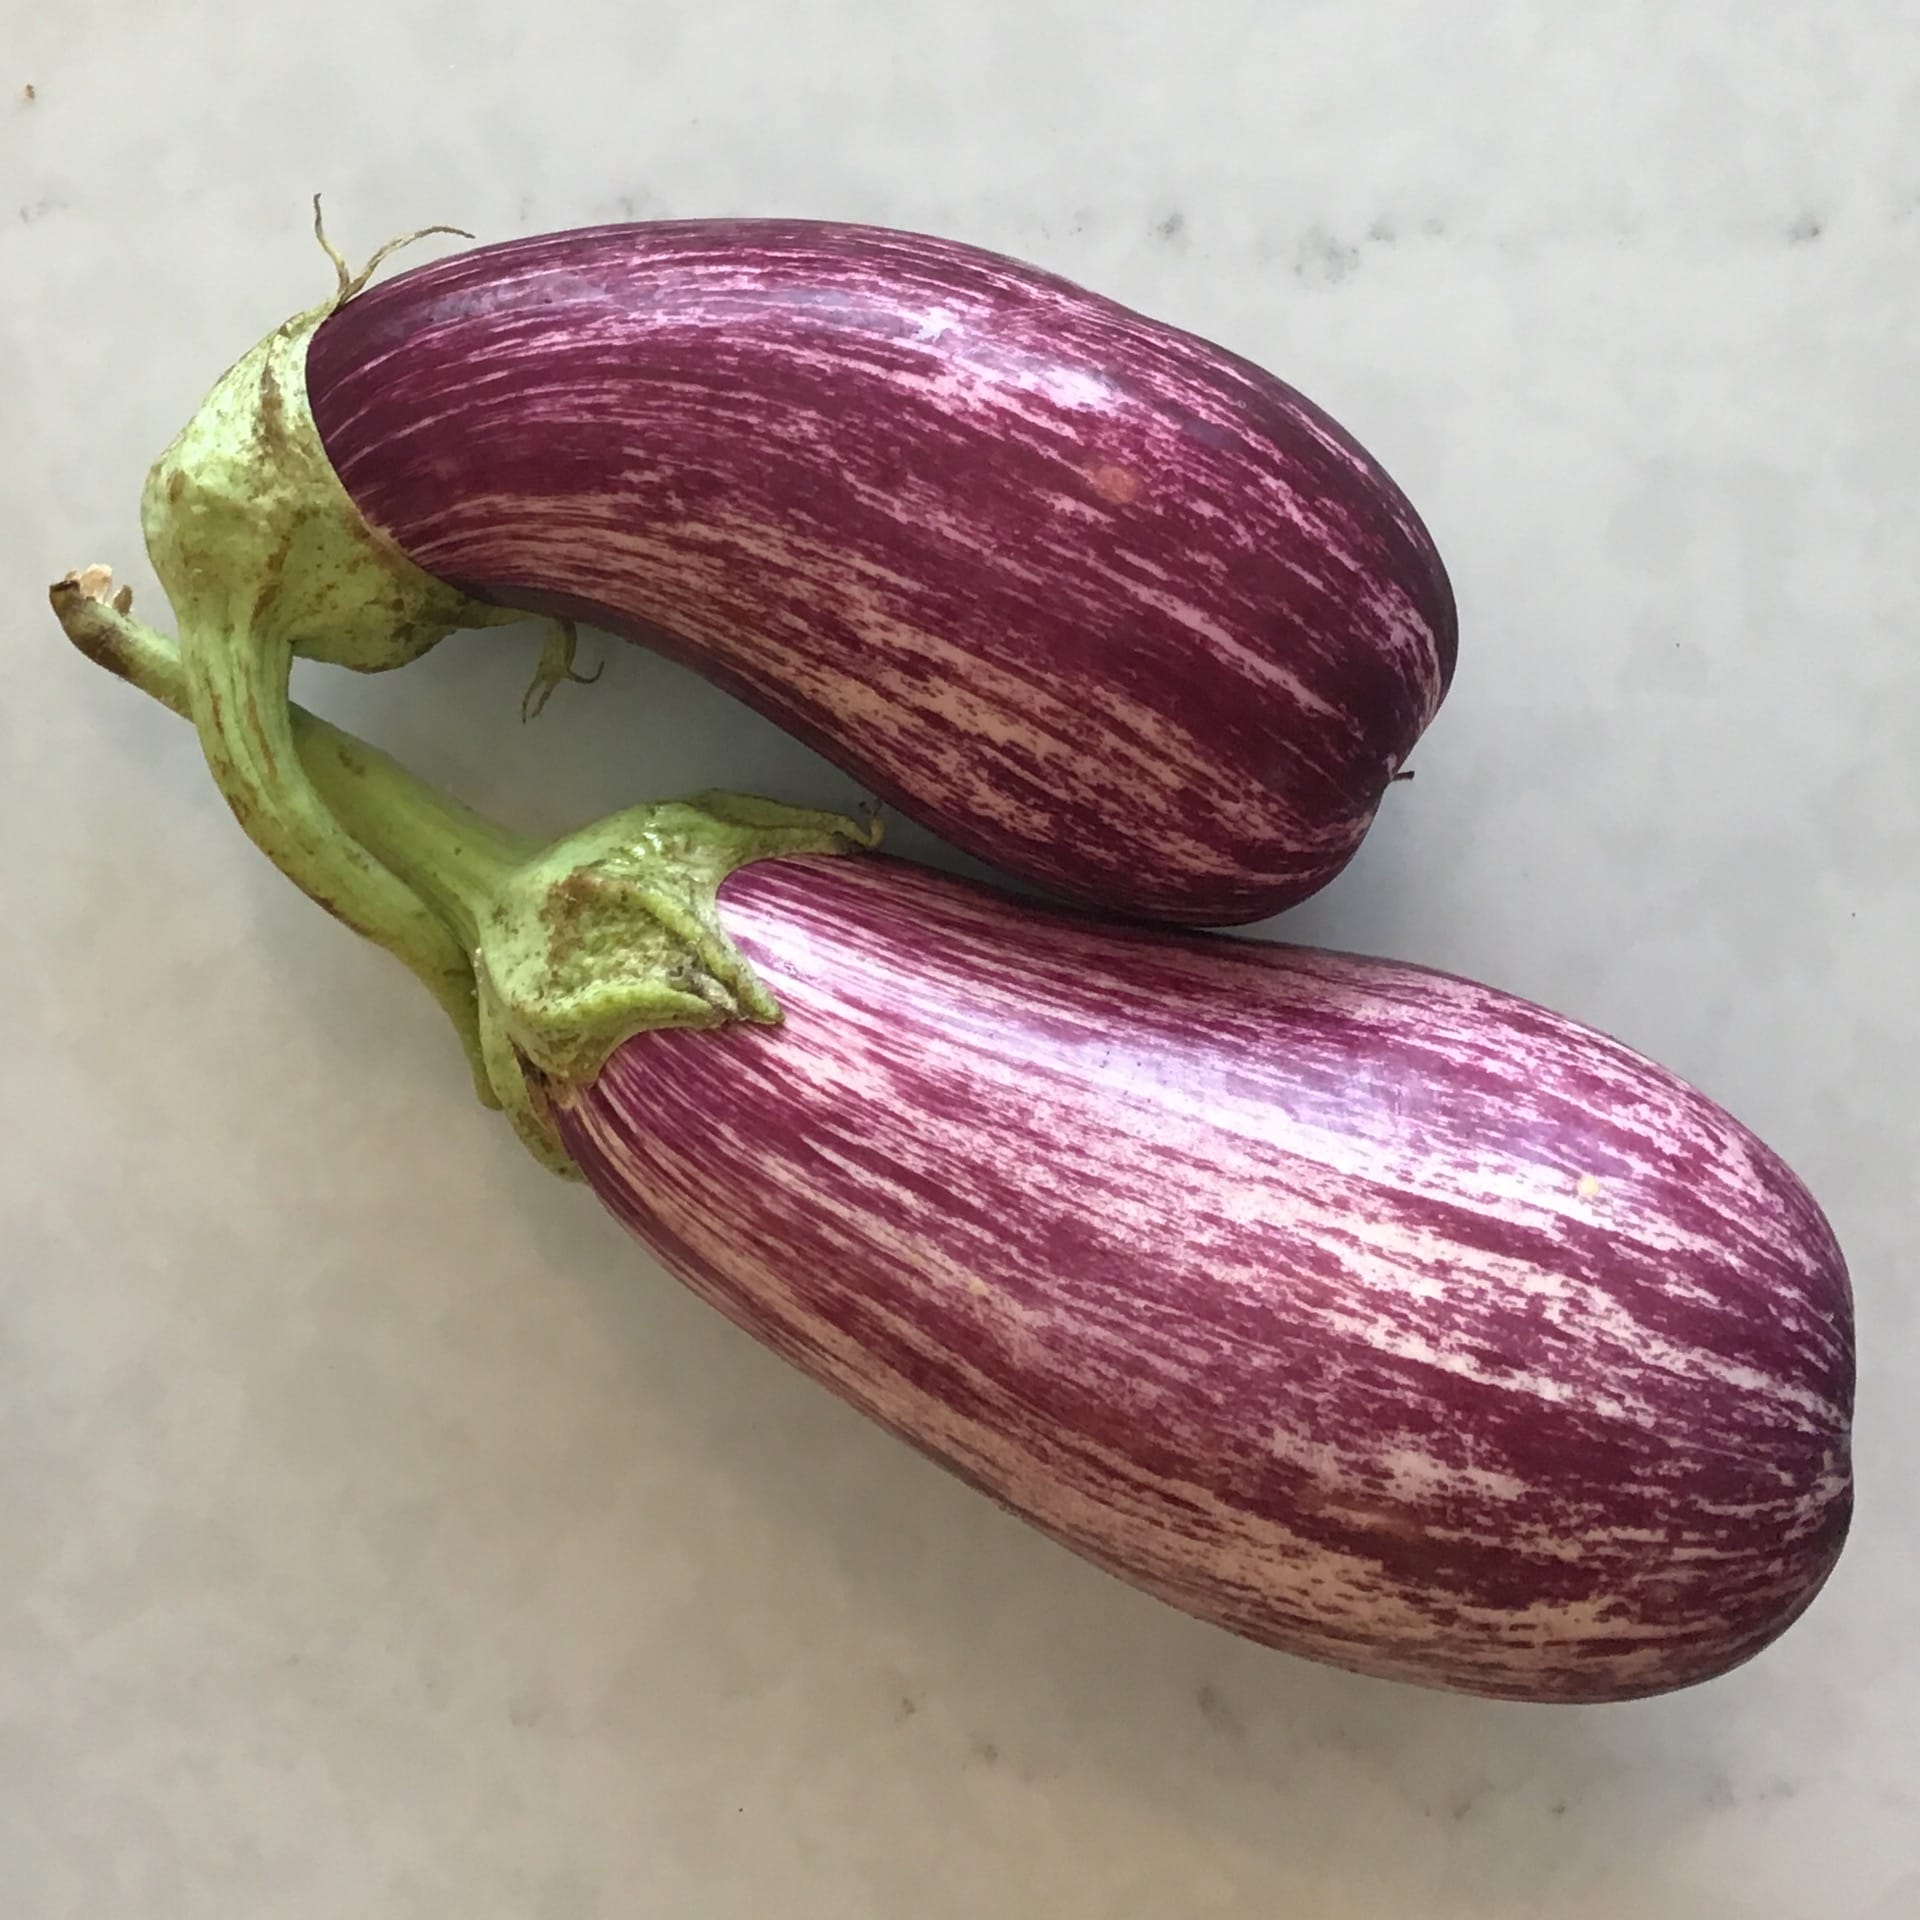 sold out italian eggplant each